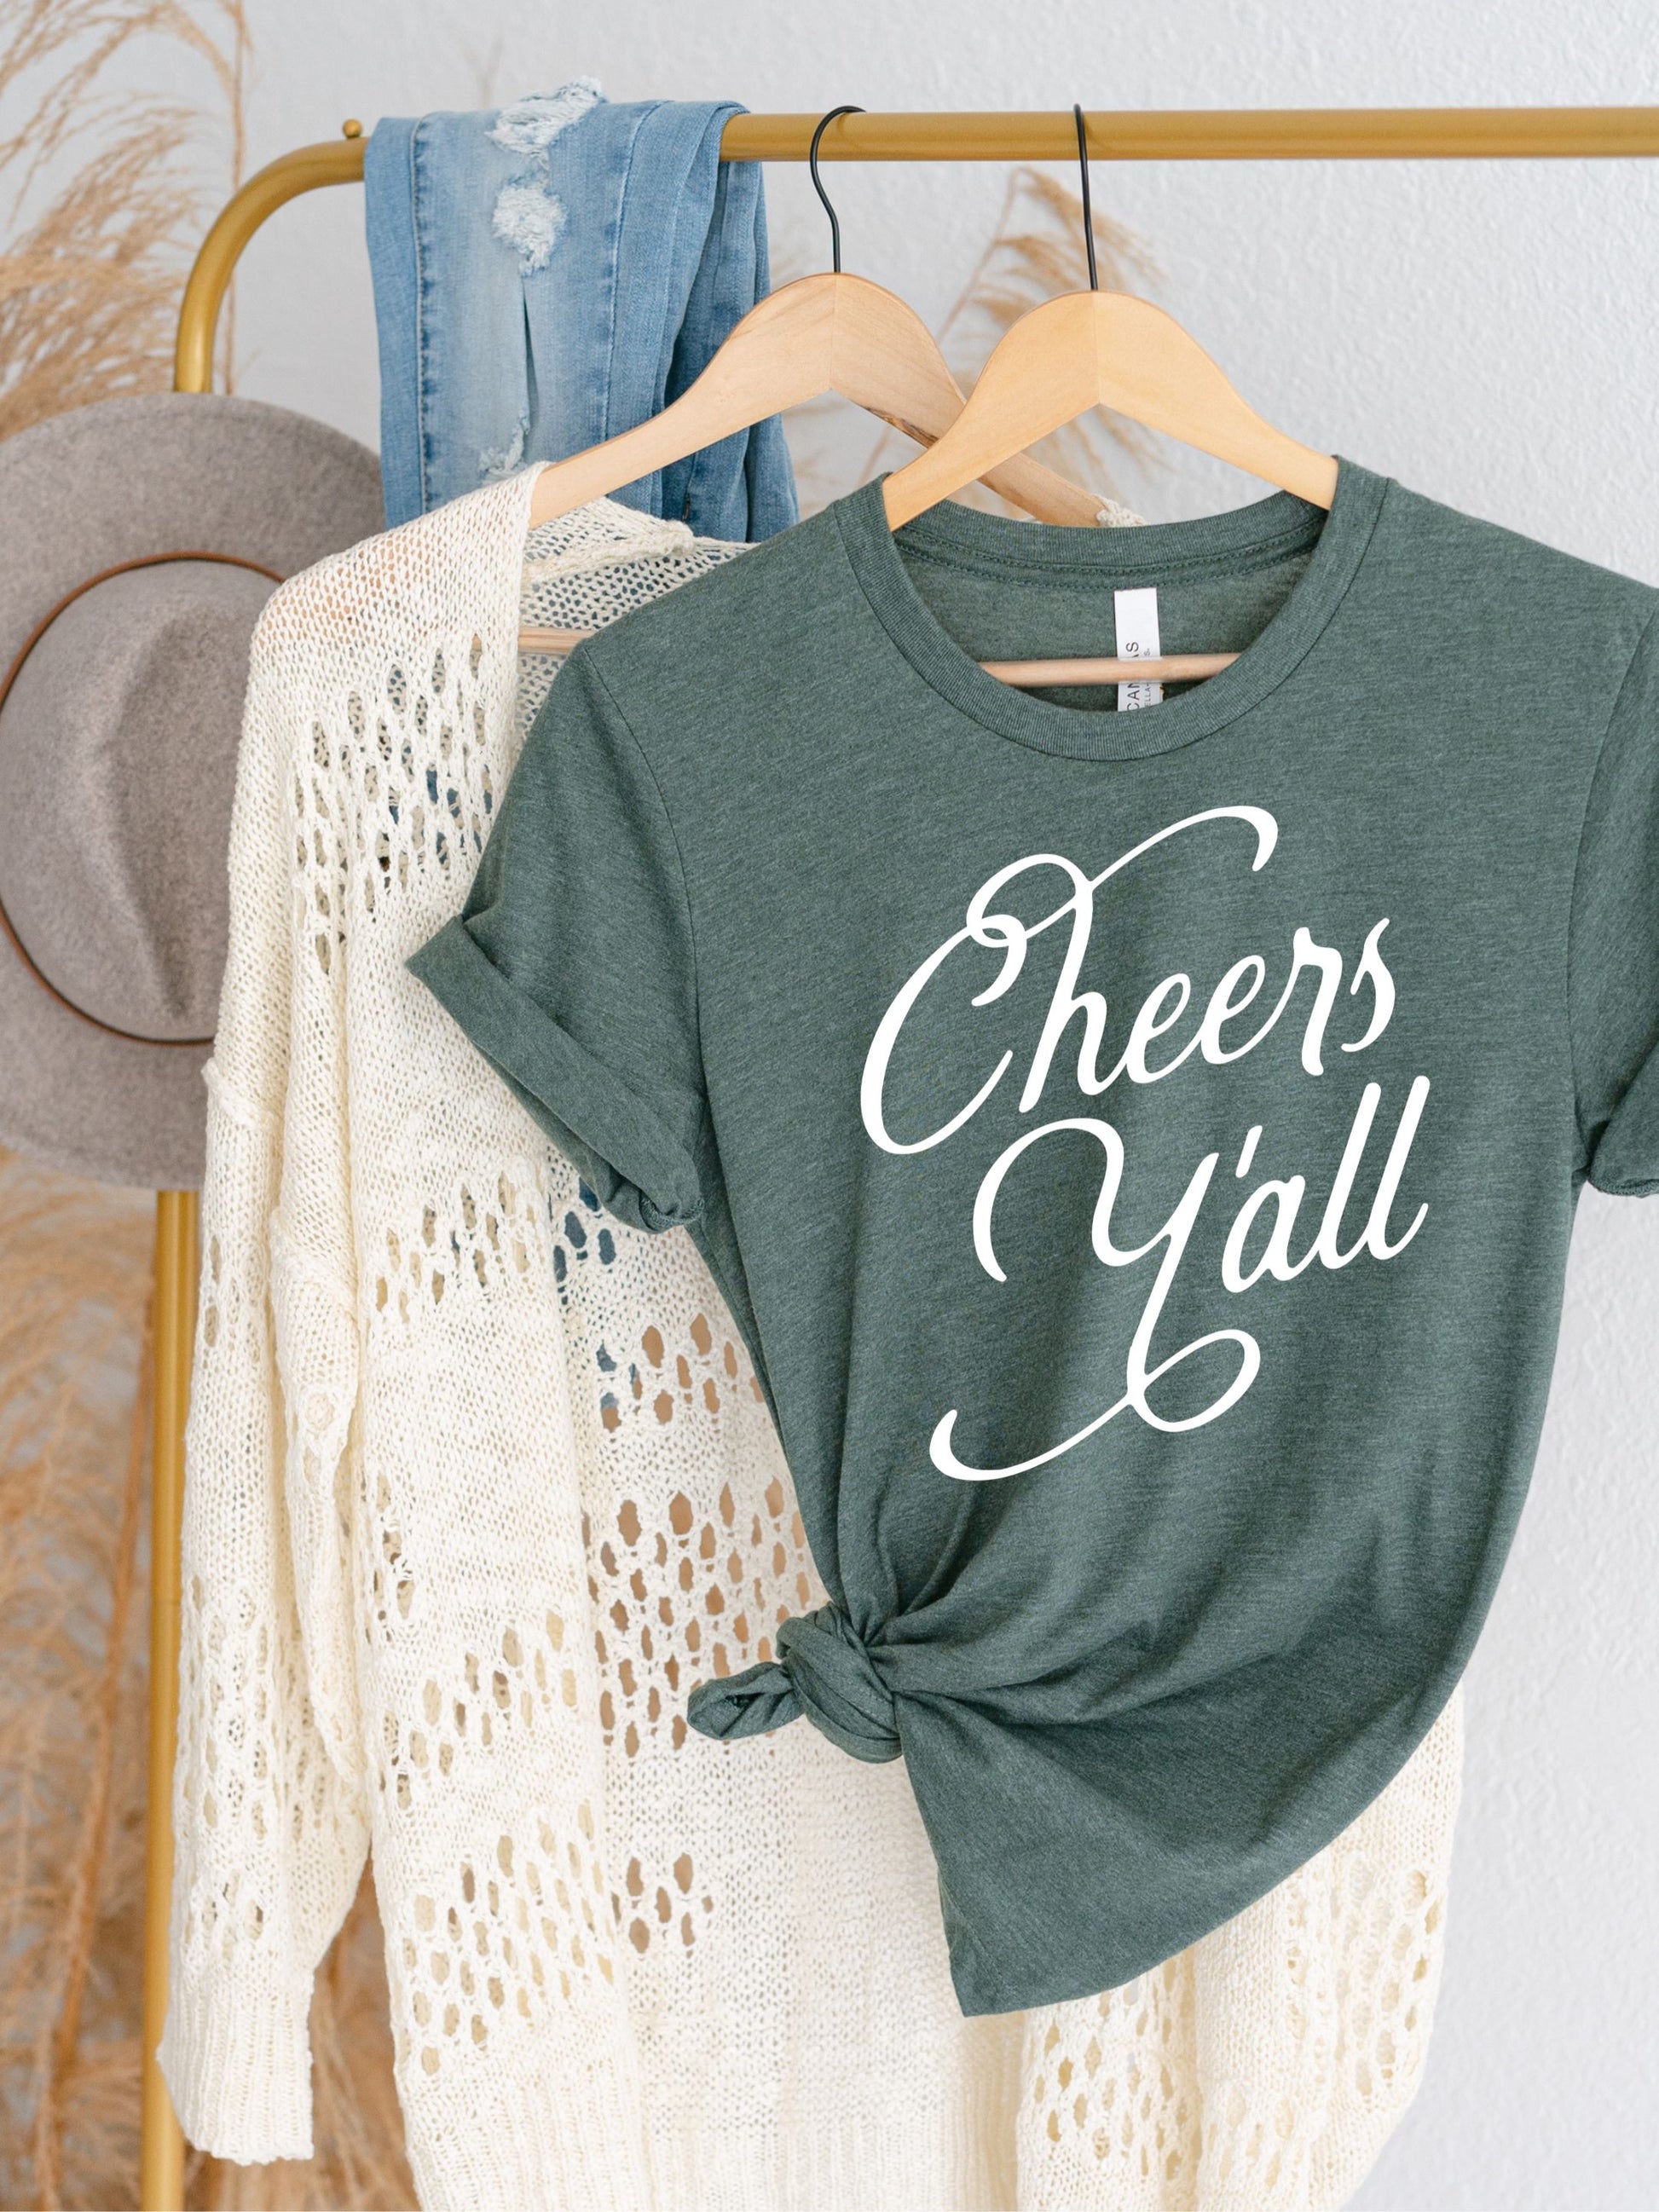 Cheers Y'all T-Shirt in green for women